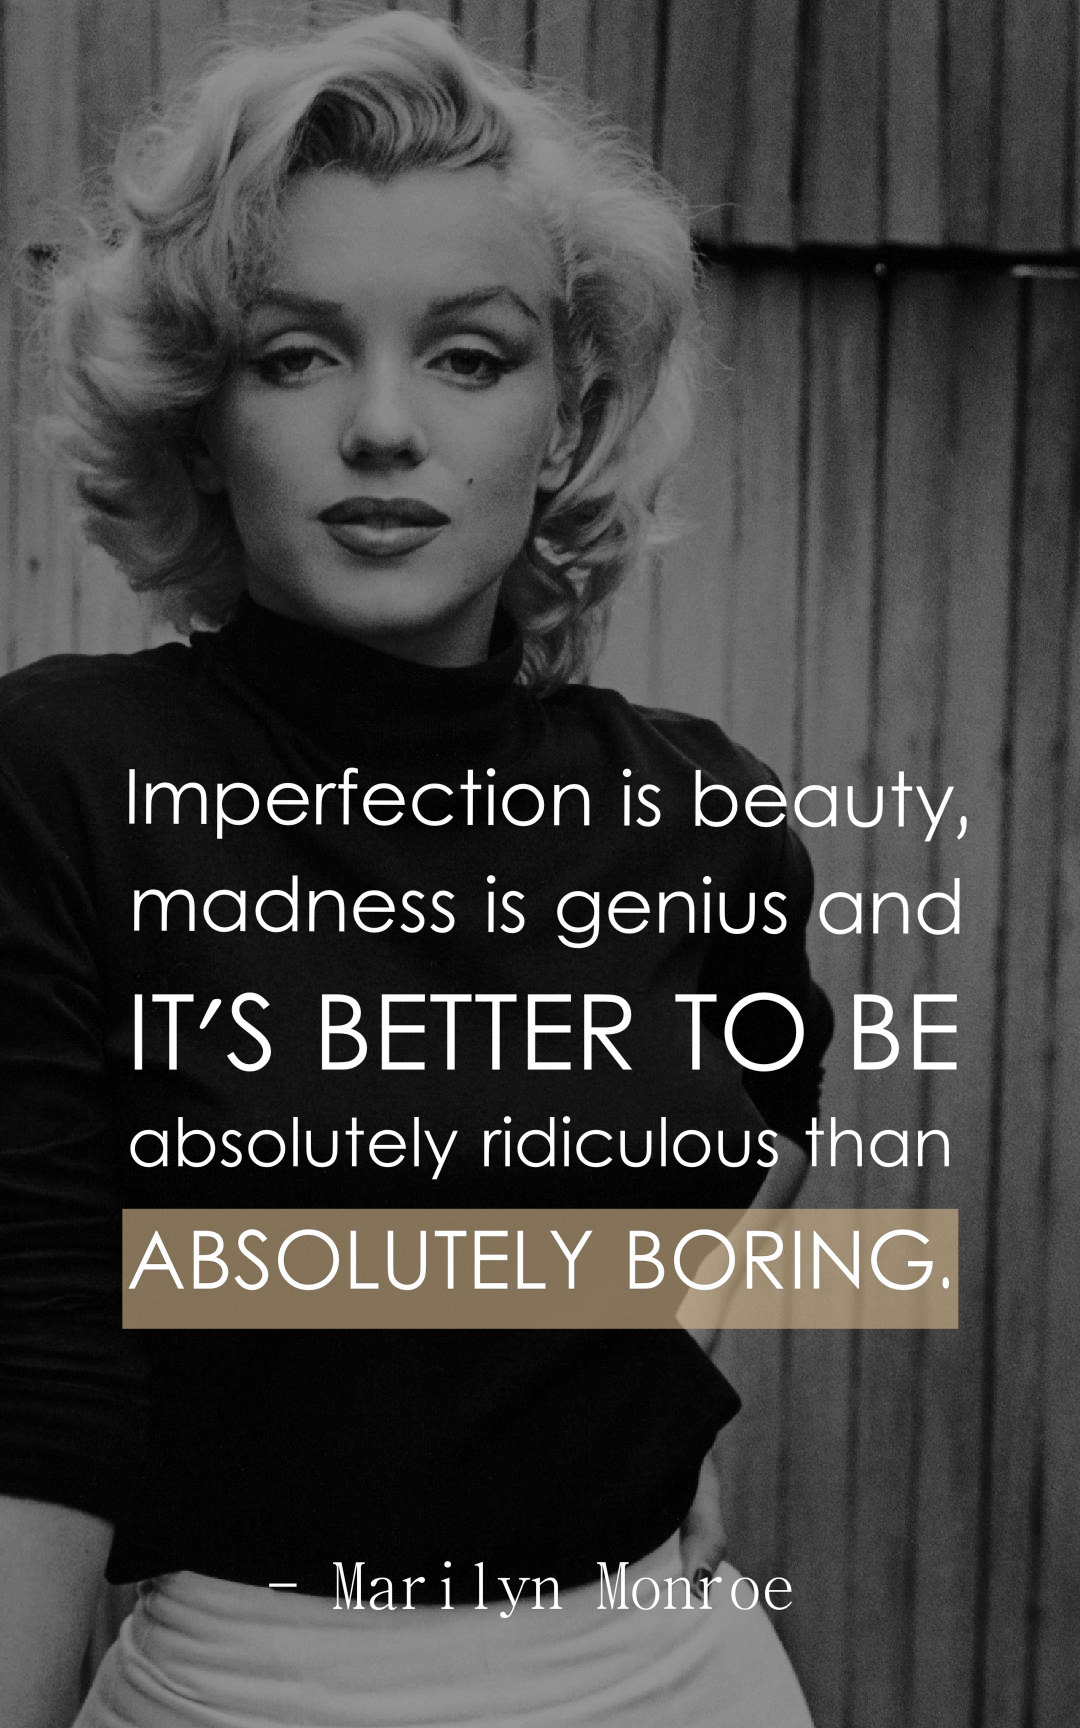 Marilyn Monroe Quotes Best Marilyn Monroe Quotes On Love And Life Men Who Think That A